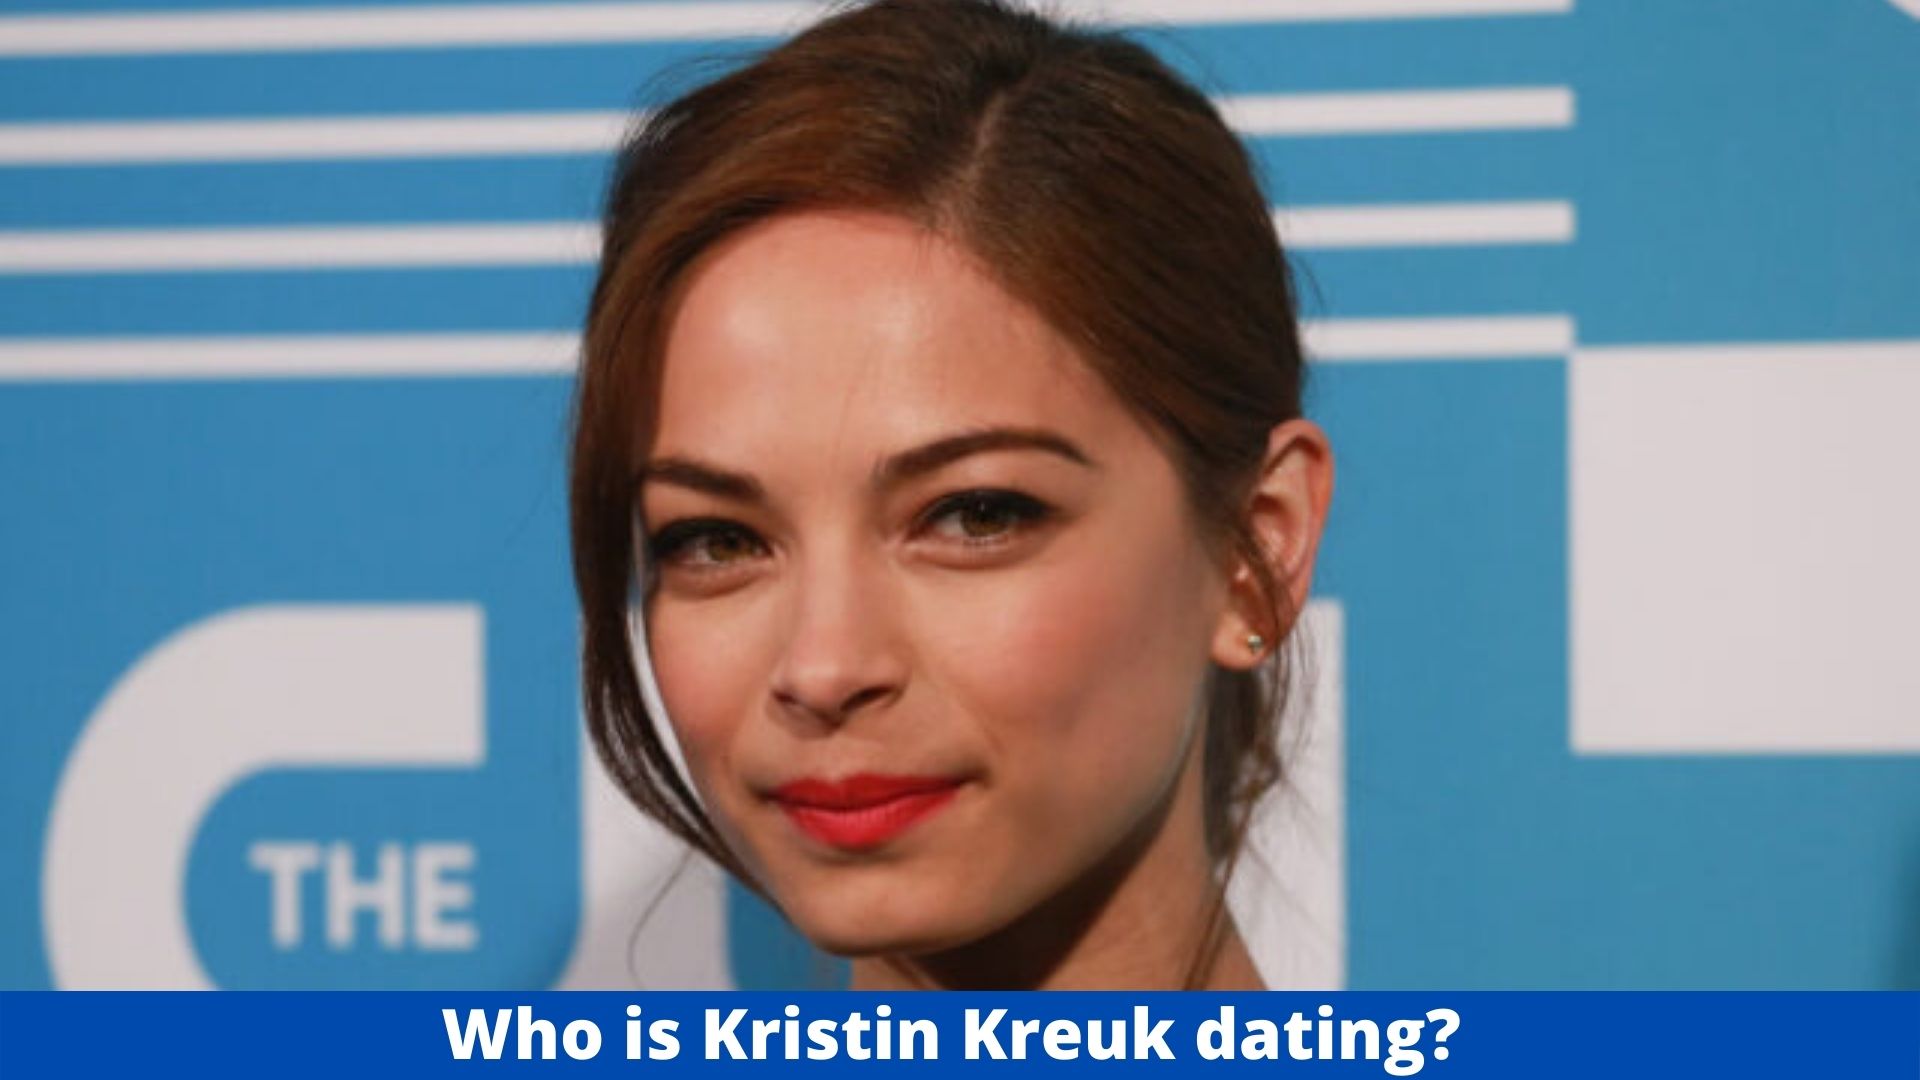 Who is Kristin Kreuk dating?